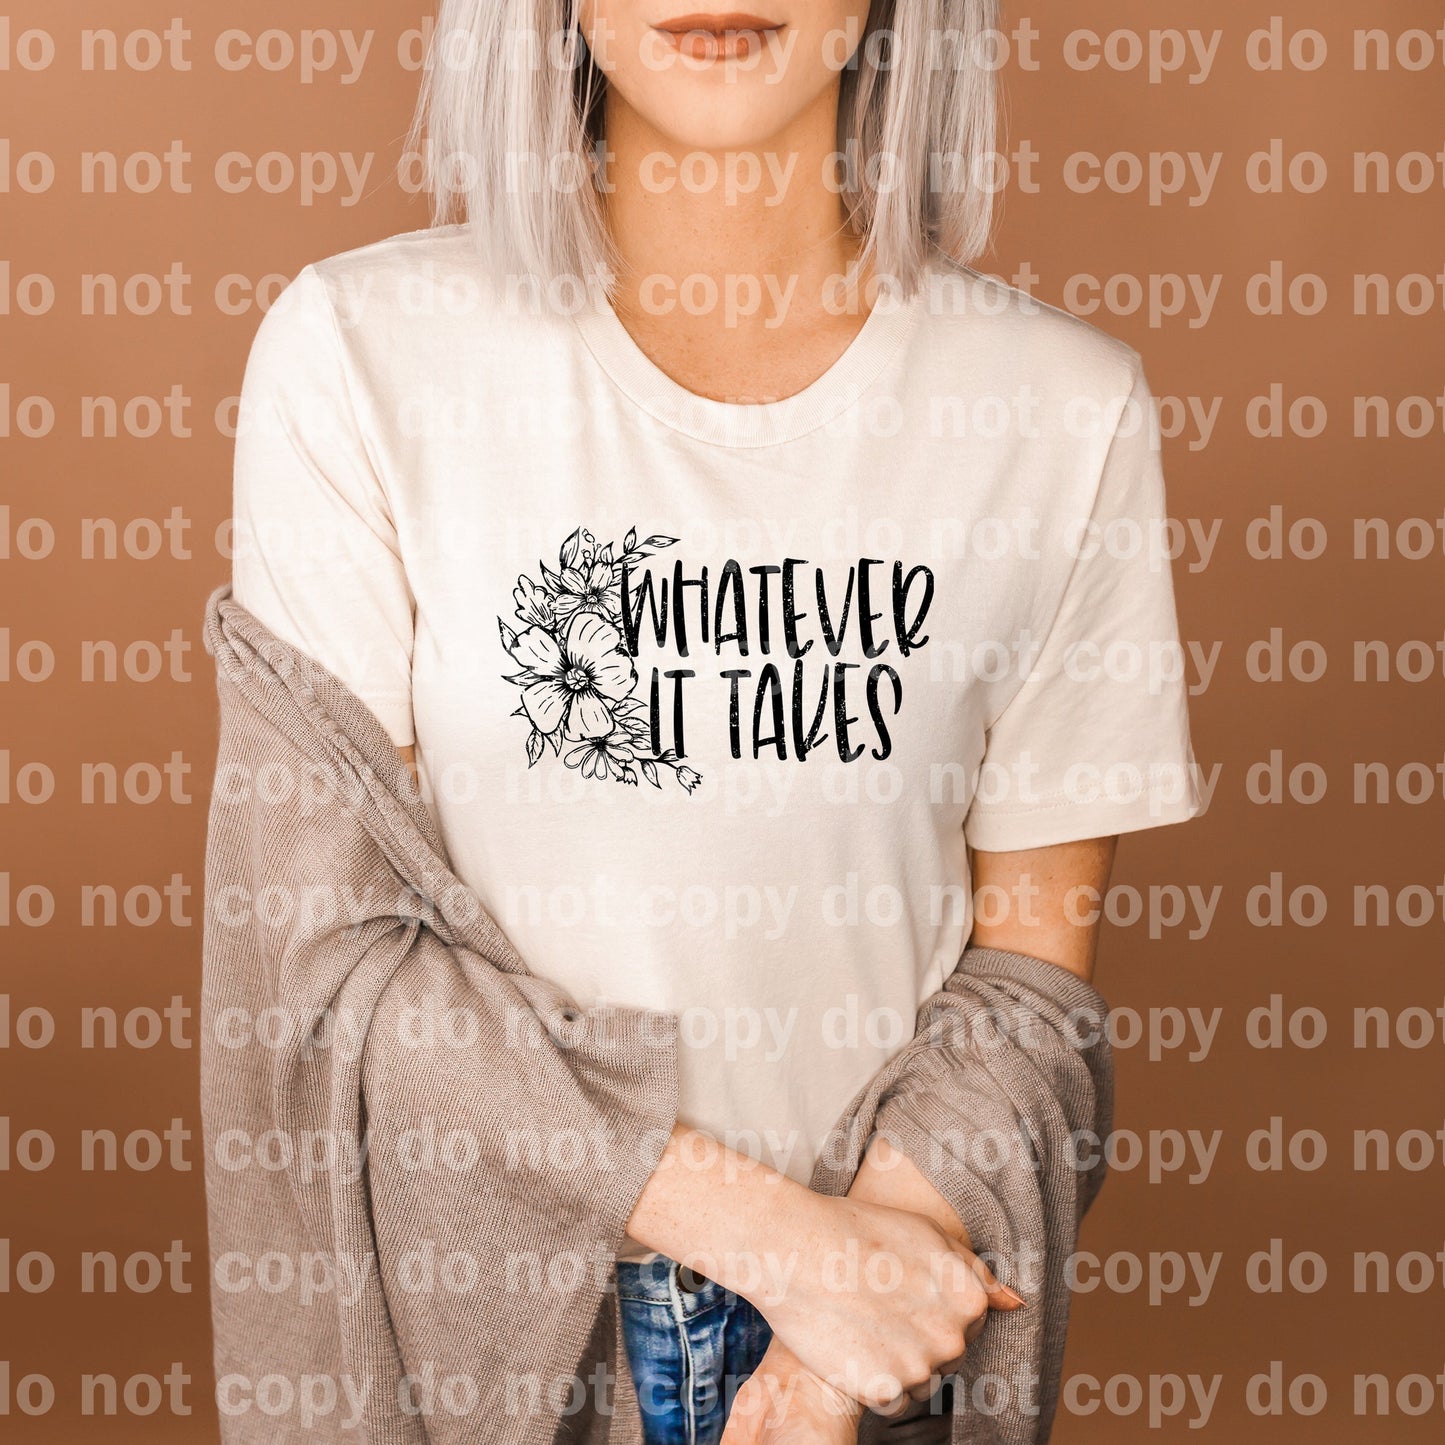 Whatever It Takes Distressed Full Color/One Color Dream Print or Sublimation Print